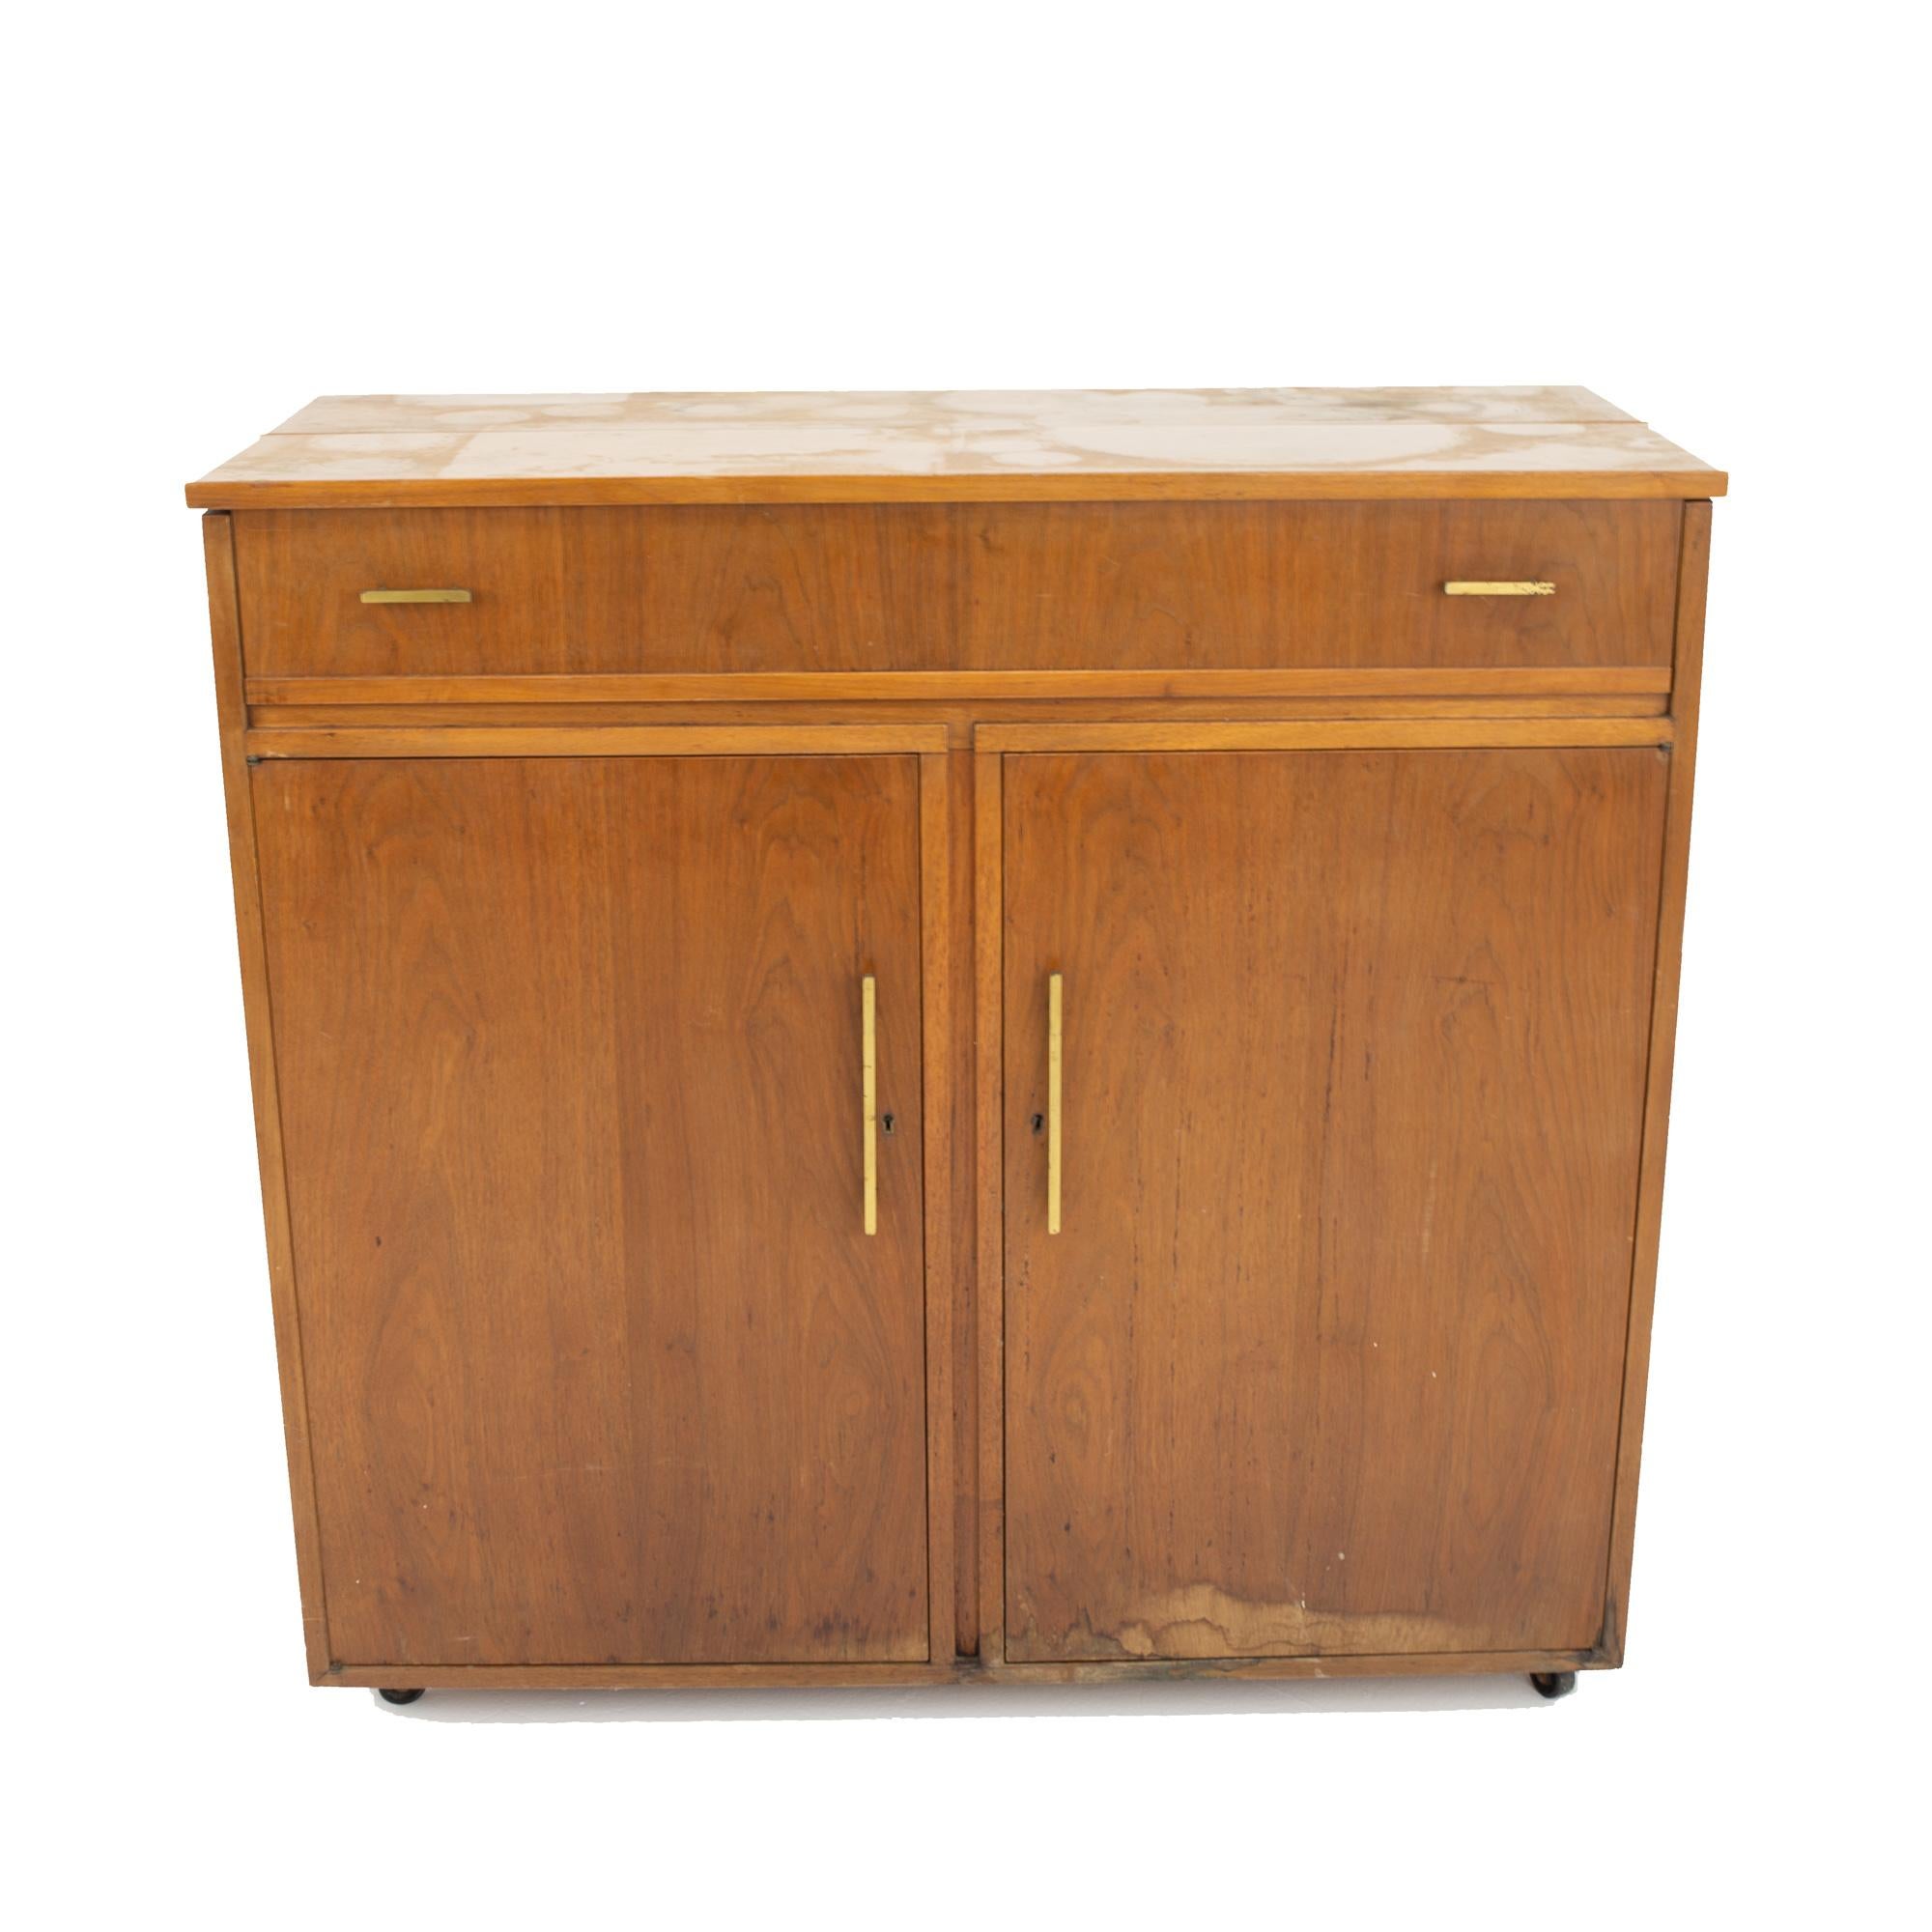 Mid Century walnut refrigerator bar
Cabinet measures: 42 wide x 18.5 deep x 40 high 

All pieces of furniture can be had in what we call restored vintage condition. This means the piece is restored upon purchase so it’s free of watermarks, chips or